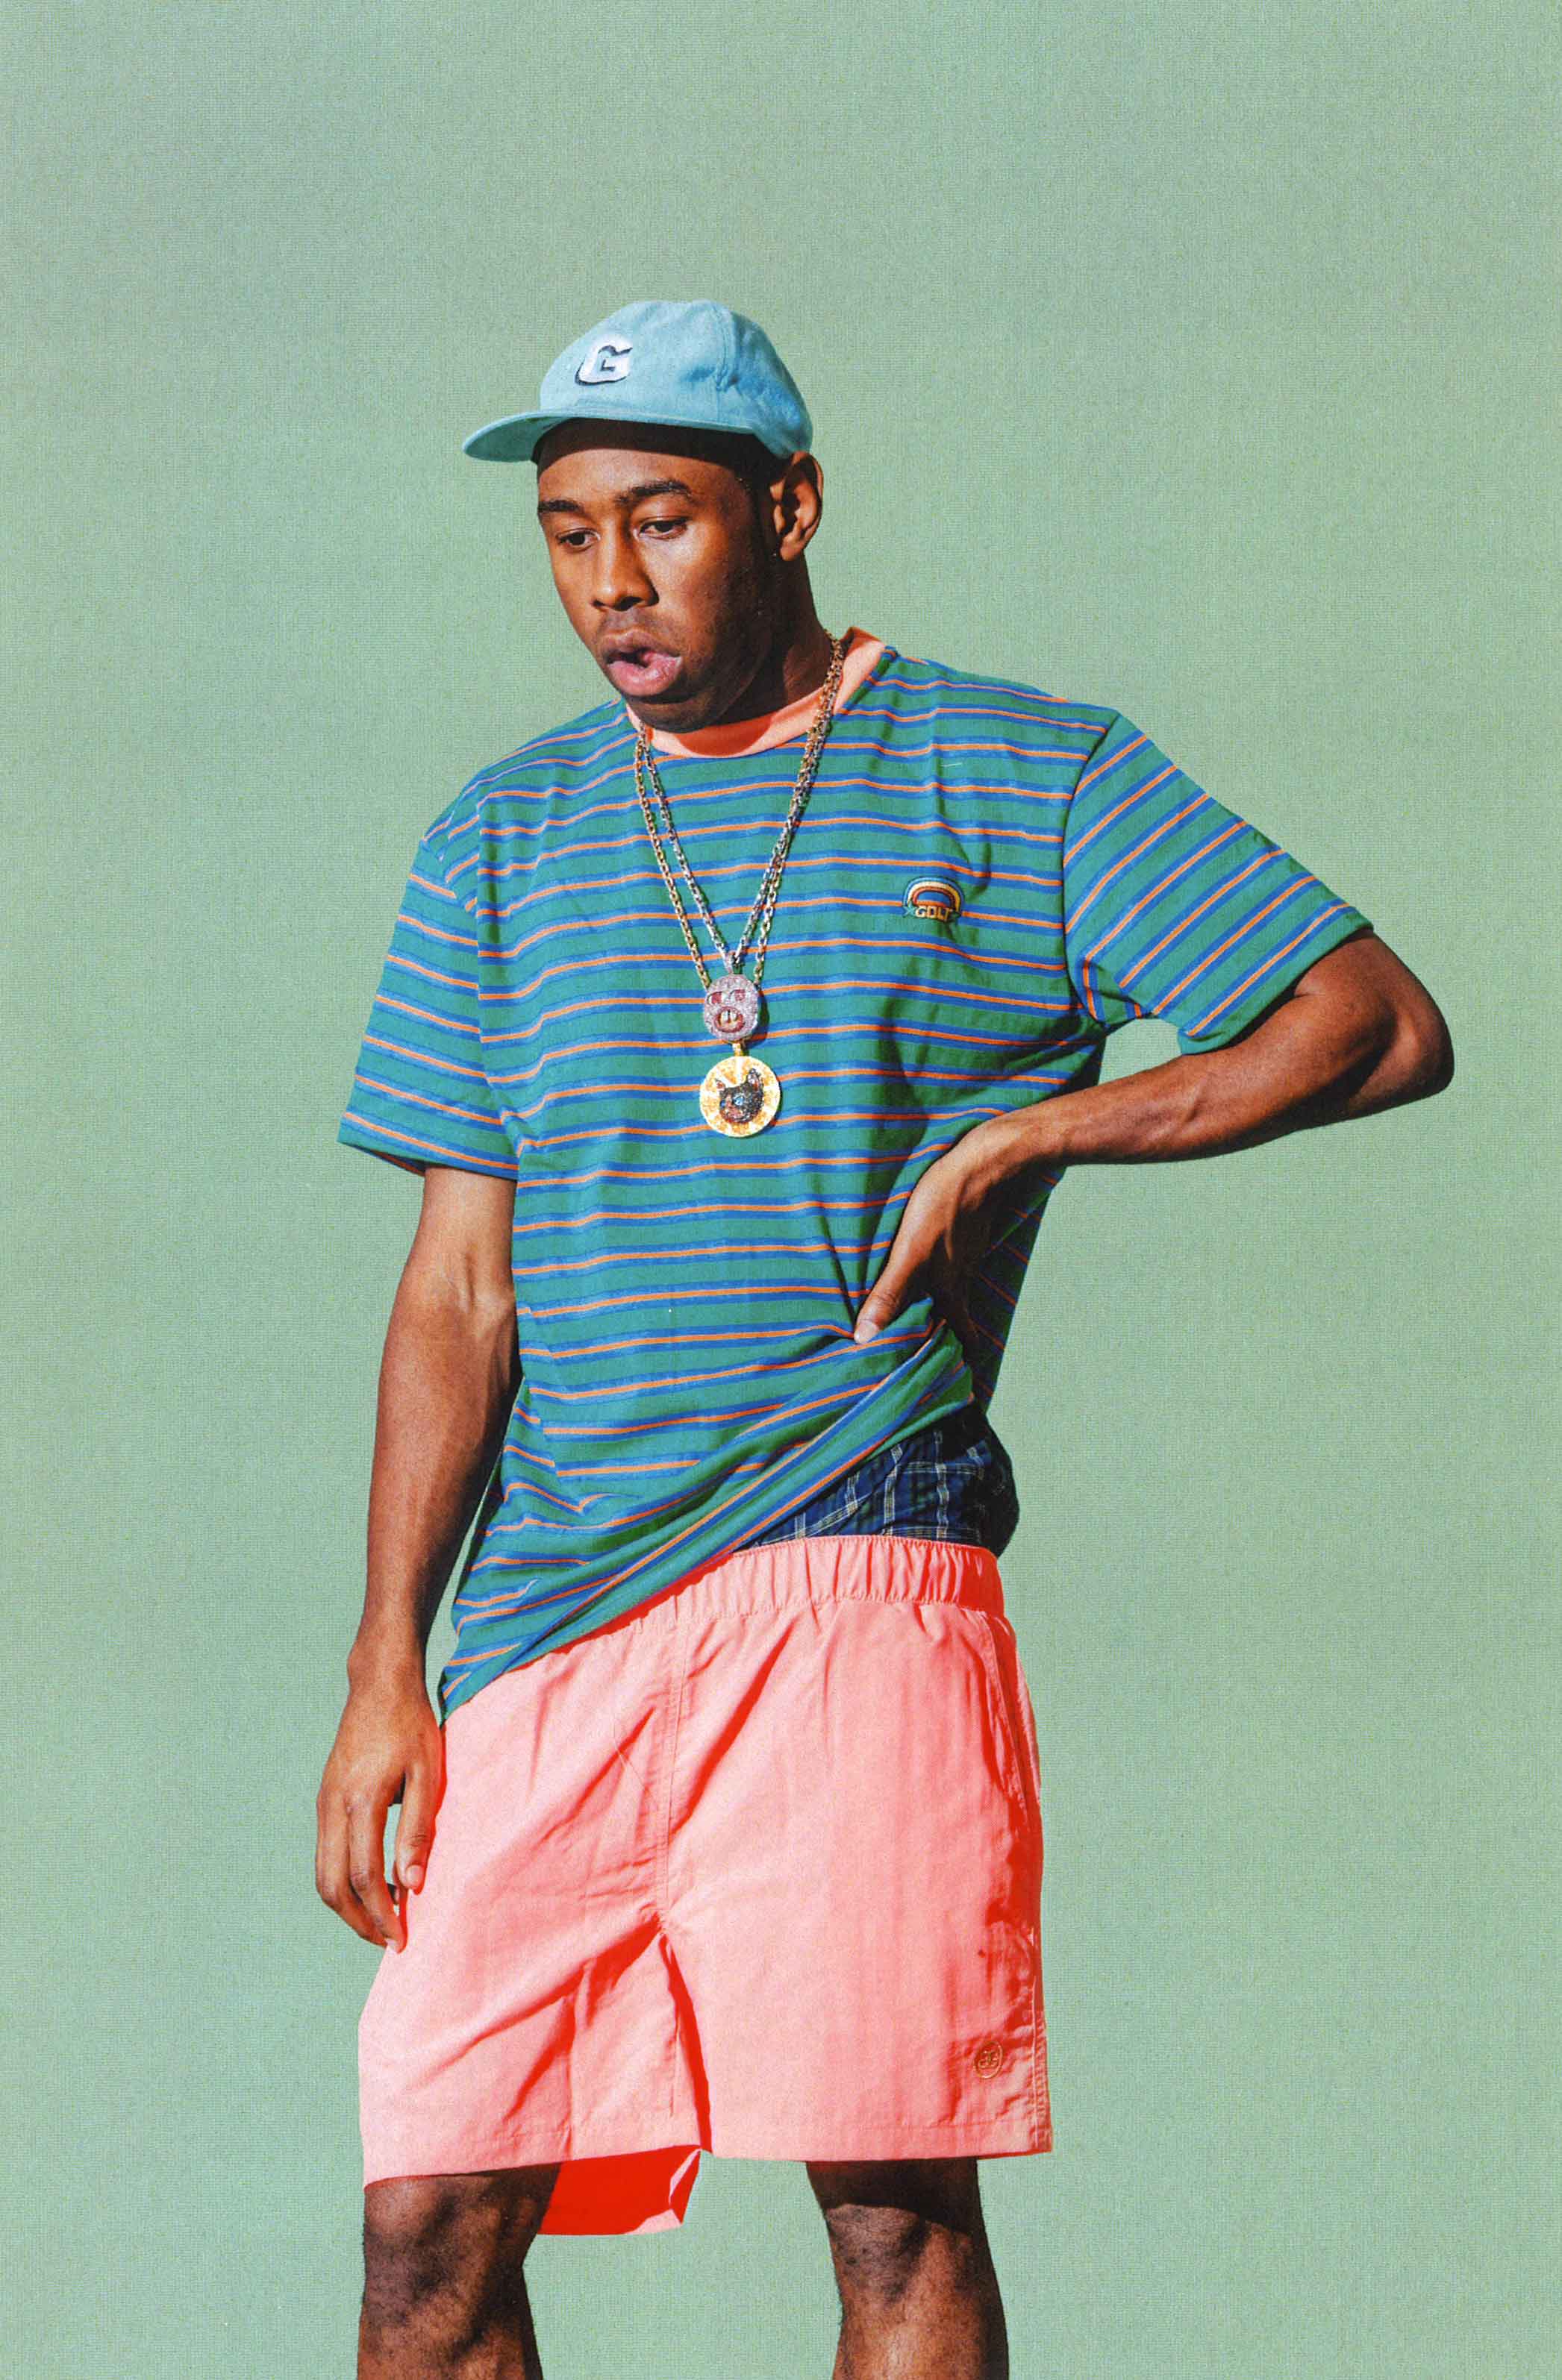 #ClientStyle Golf Wang AW/15 Look-book | Client Magazine2093 x 3190